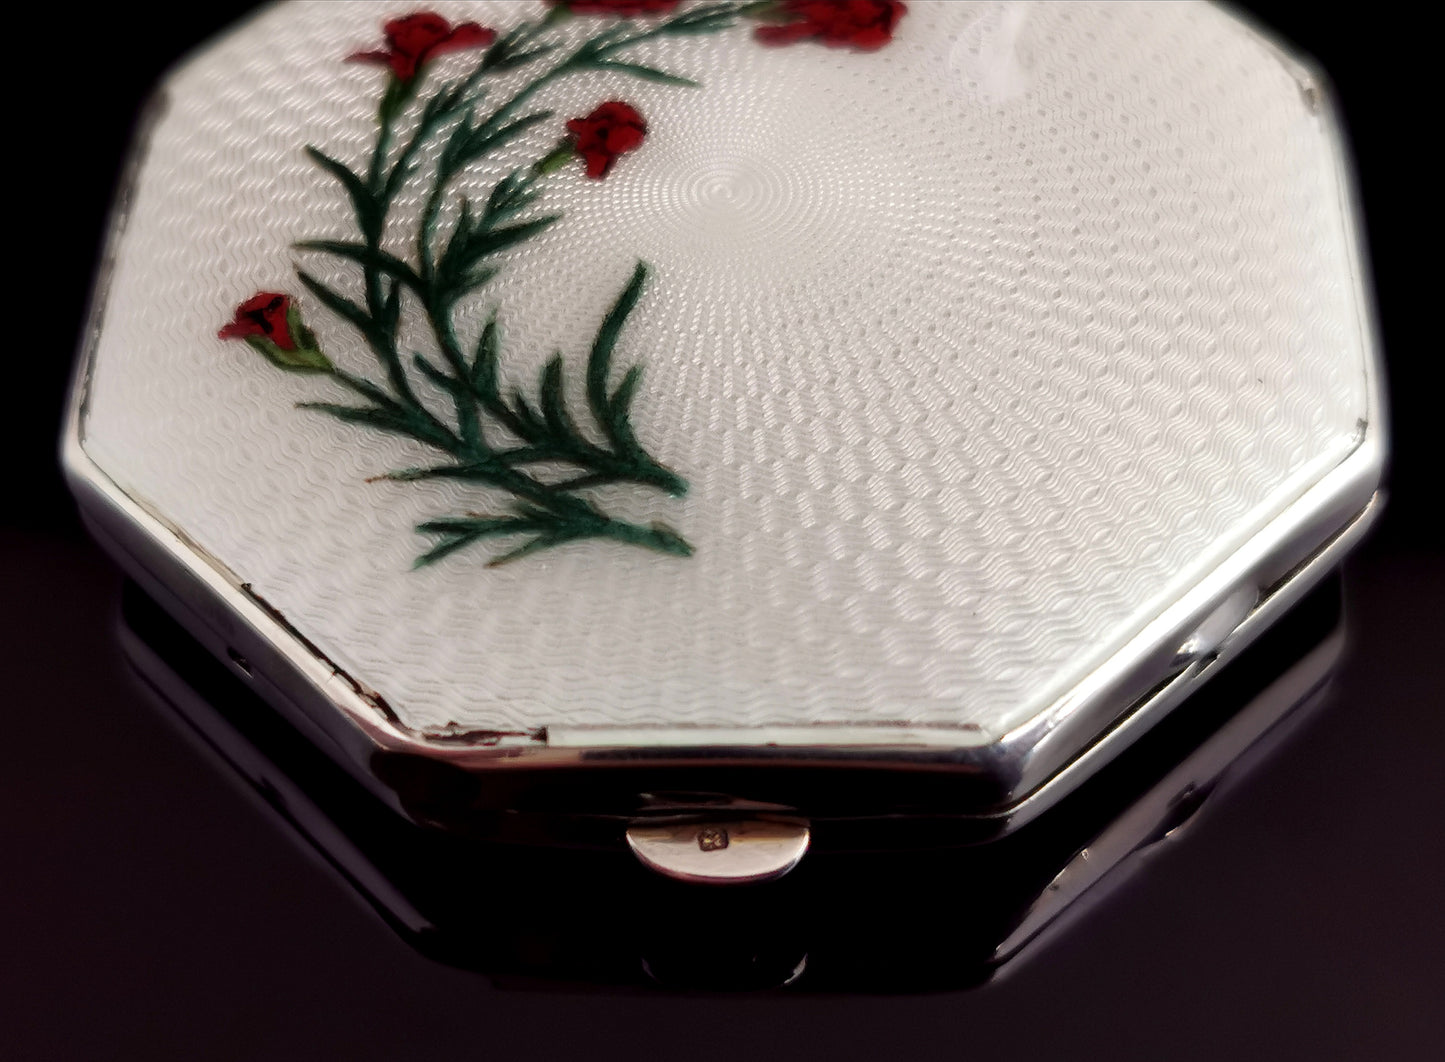 Vintage Art Deco silver and enamel compact, carnations